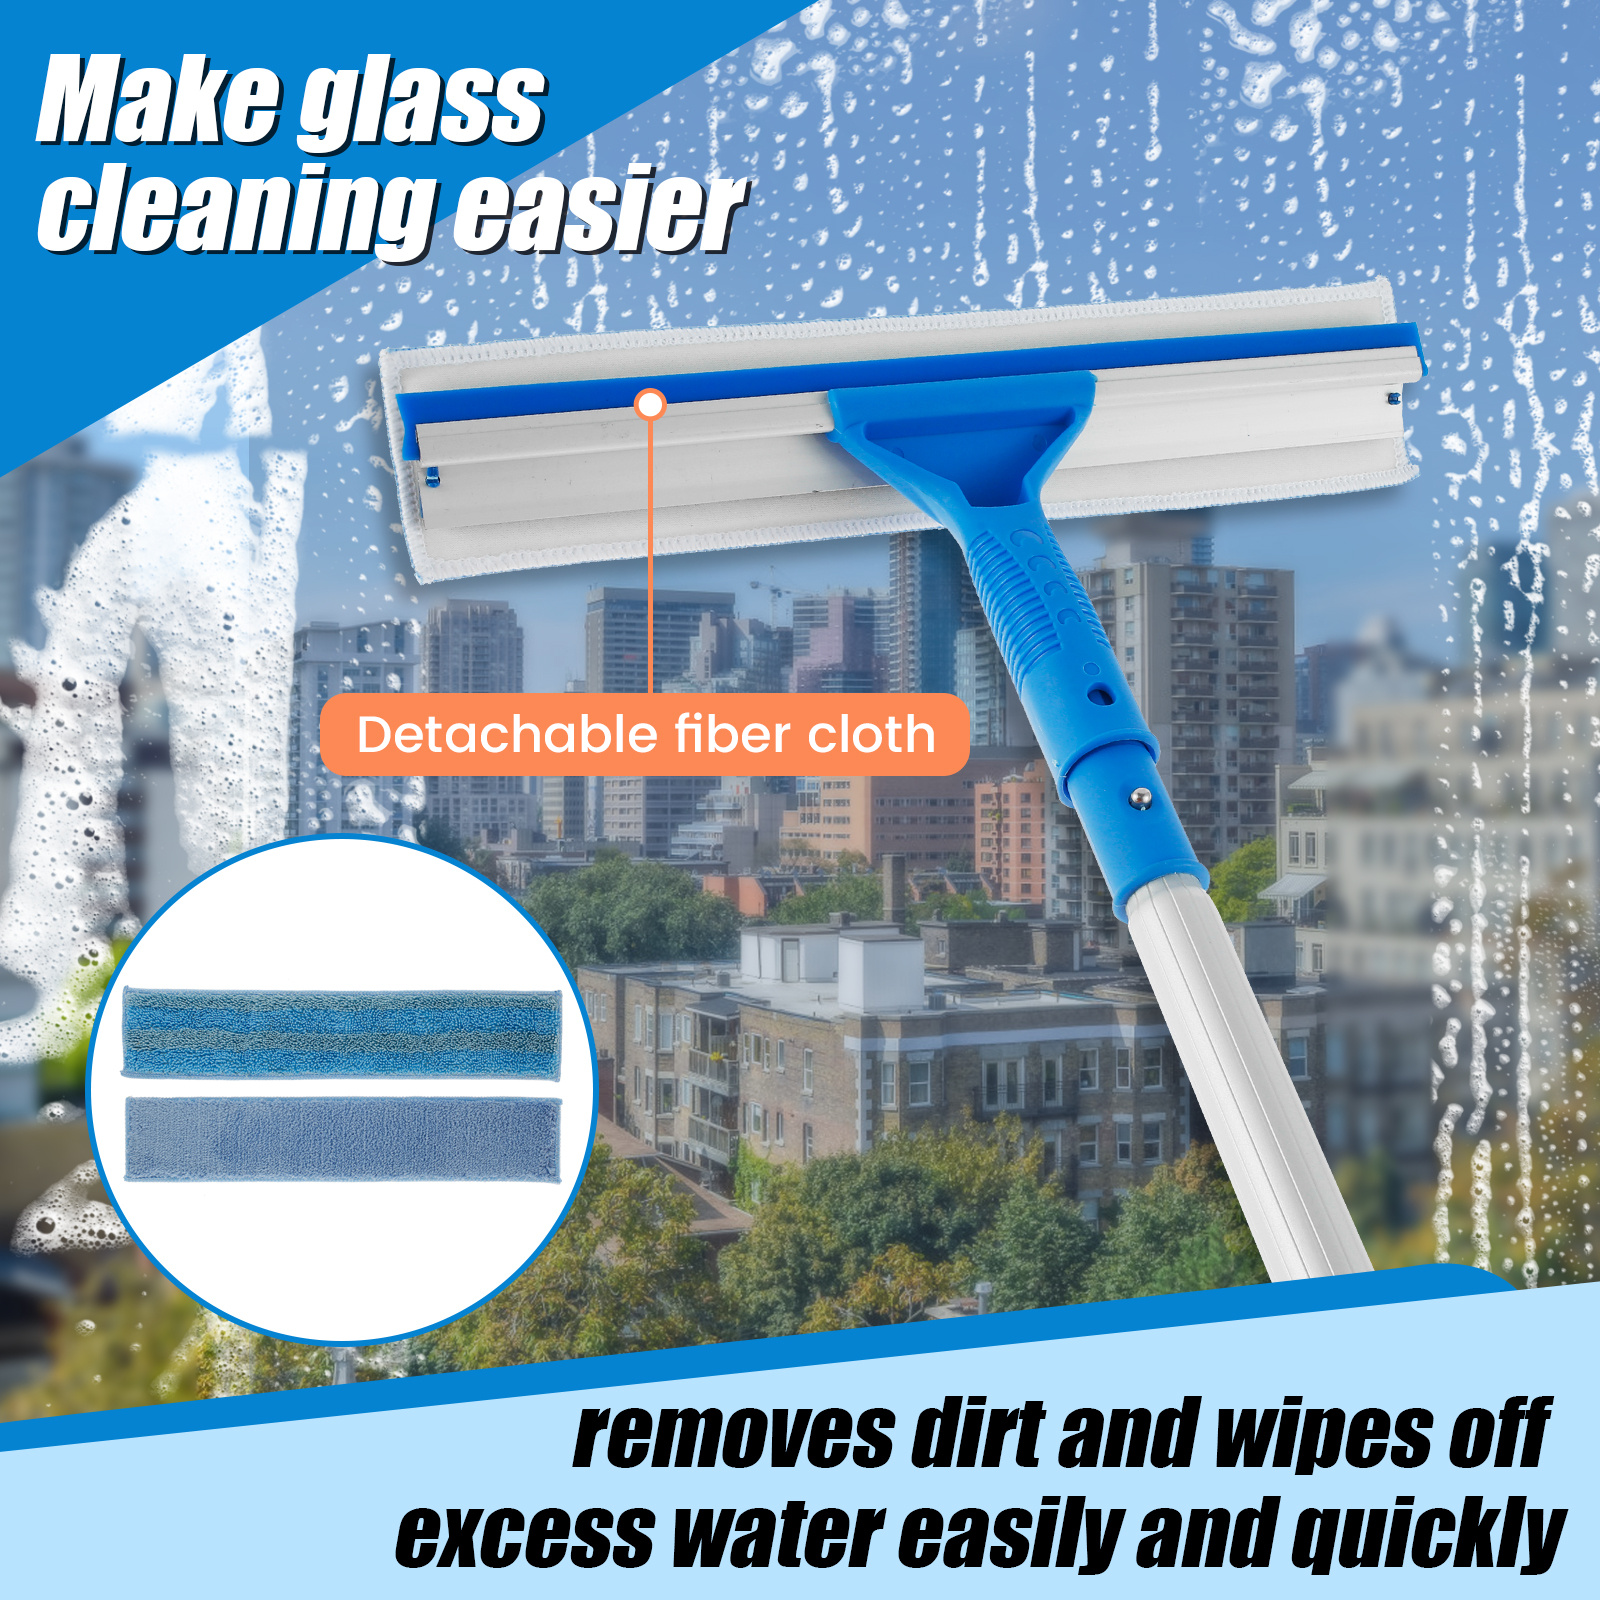 All Purpose Window Squeegee with 58 inch Long Handle, 2 Microfiber